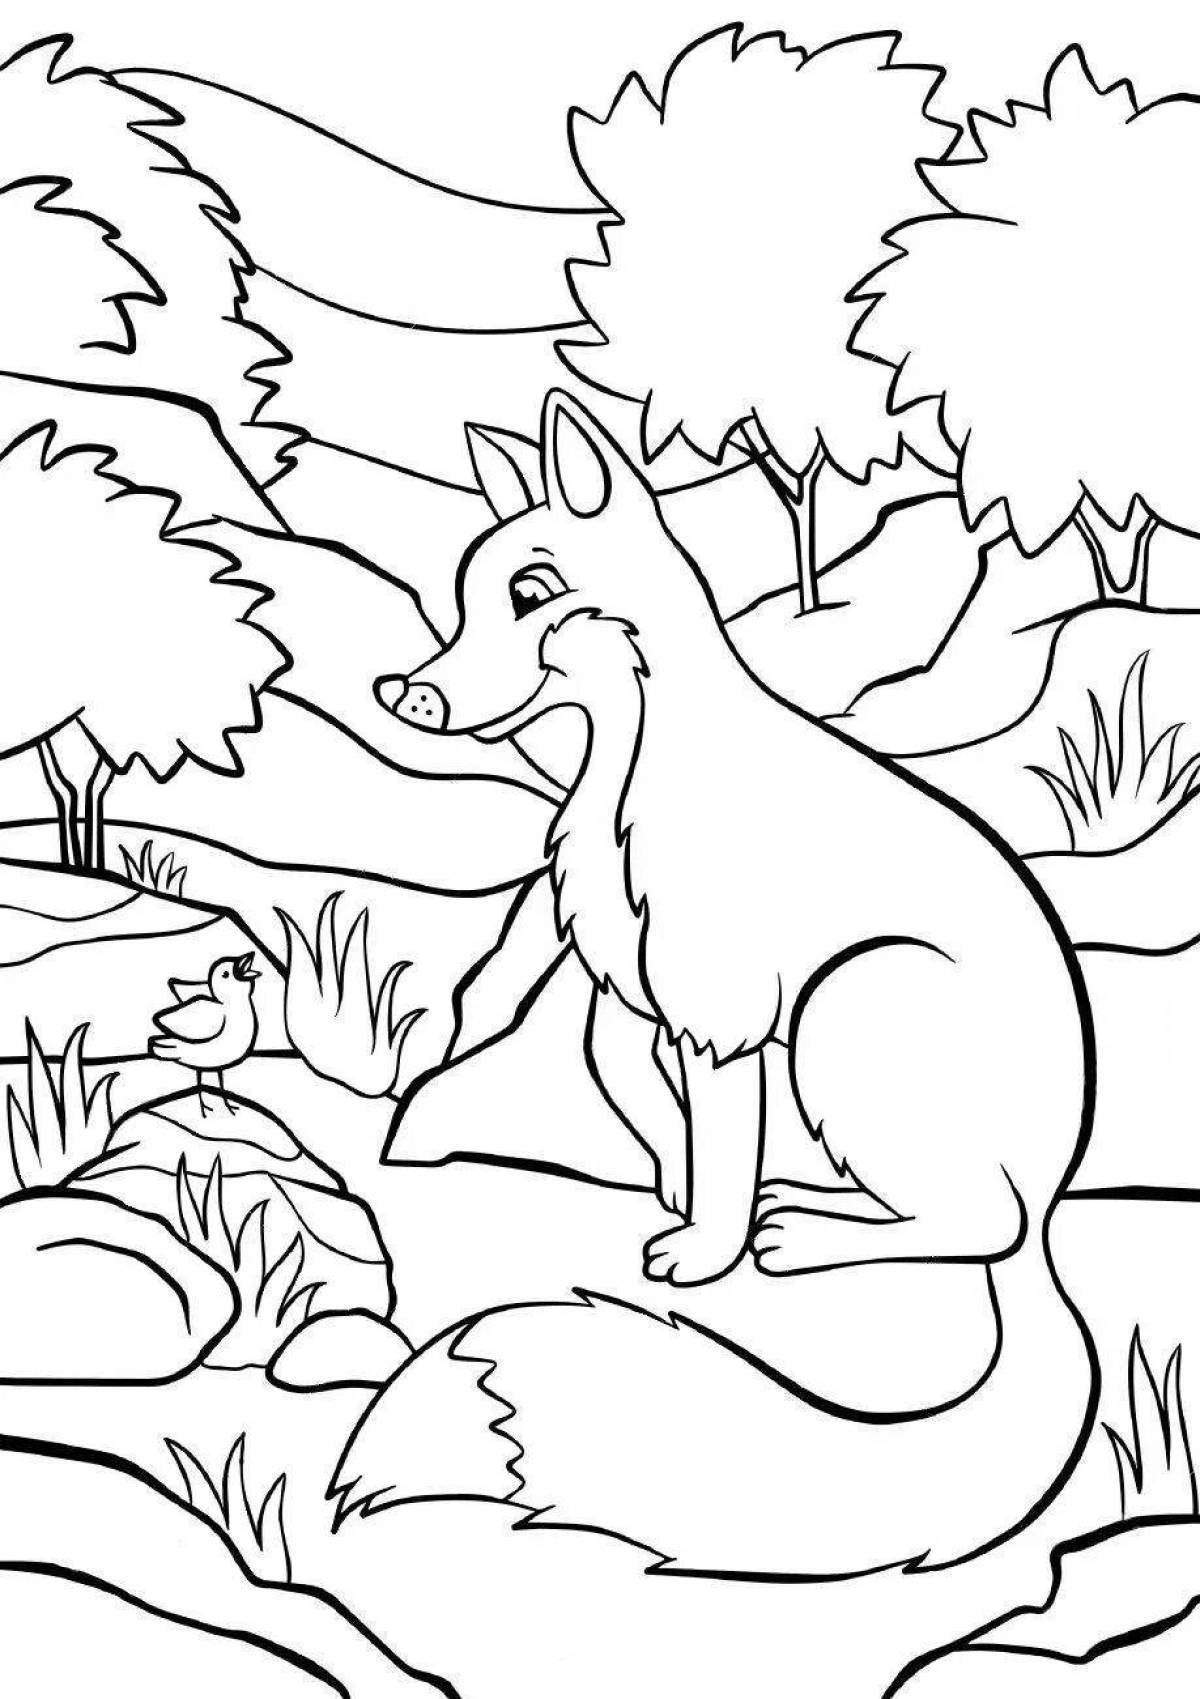 Coloring book playful fox and bianca mouse